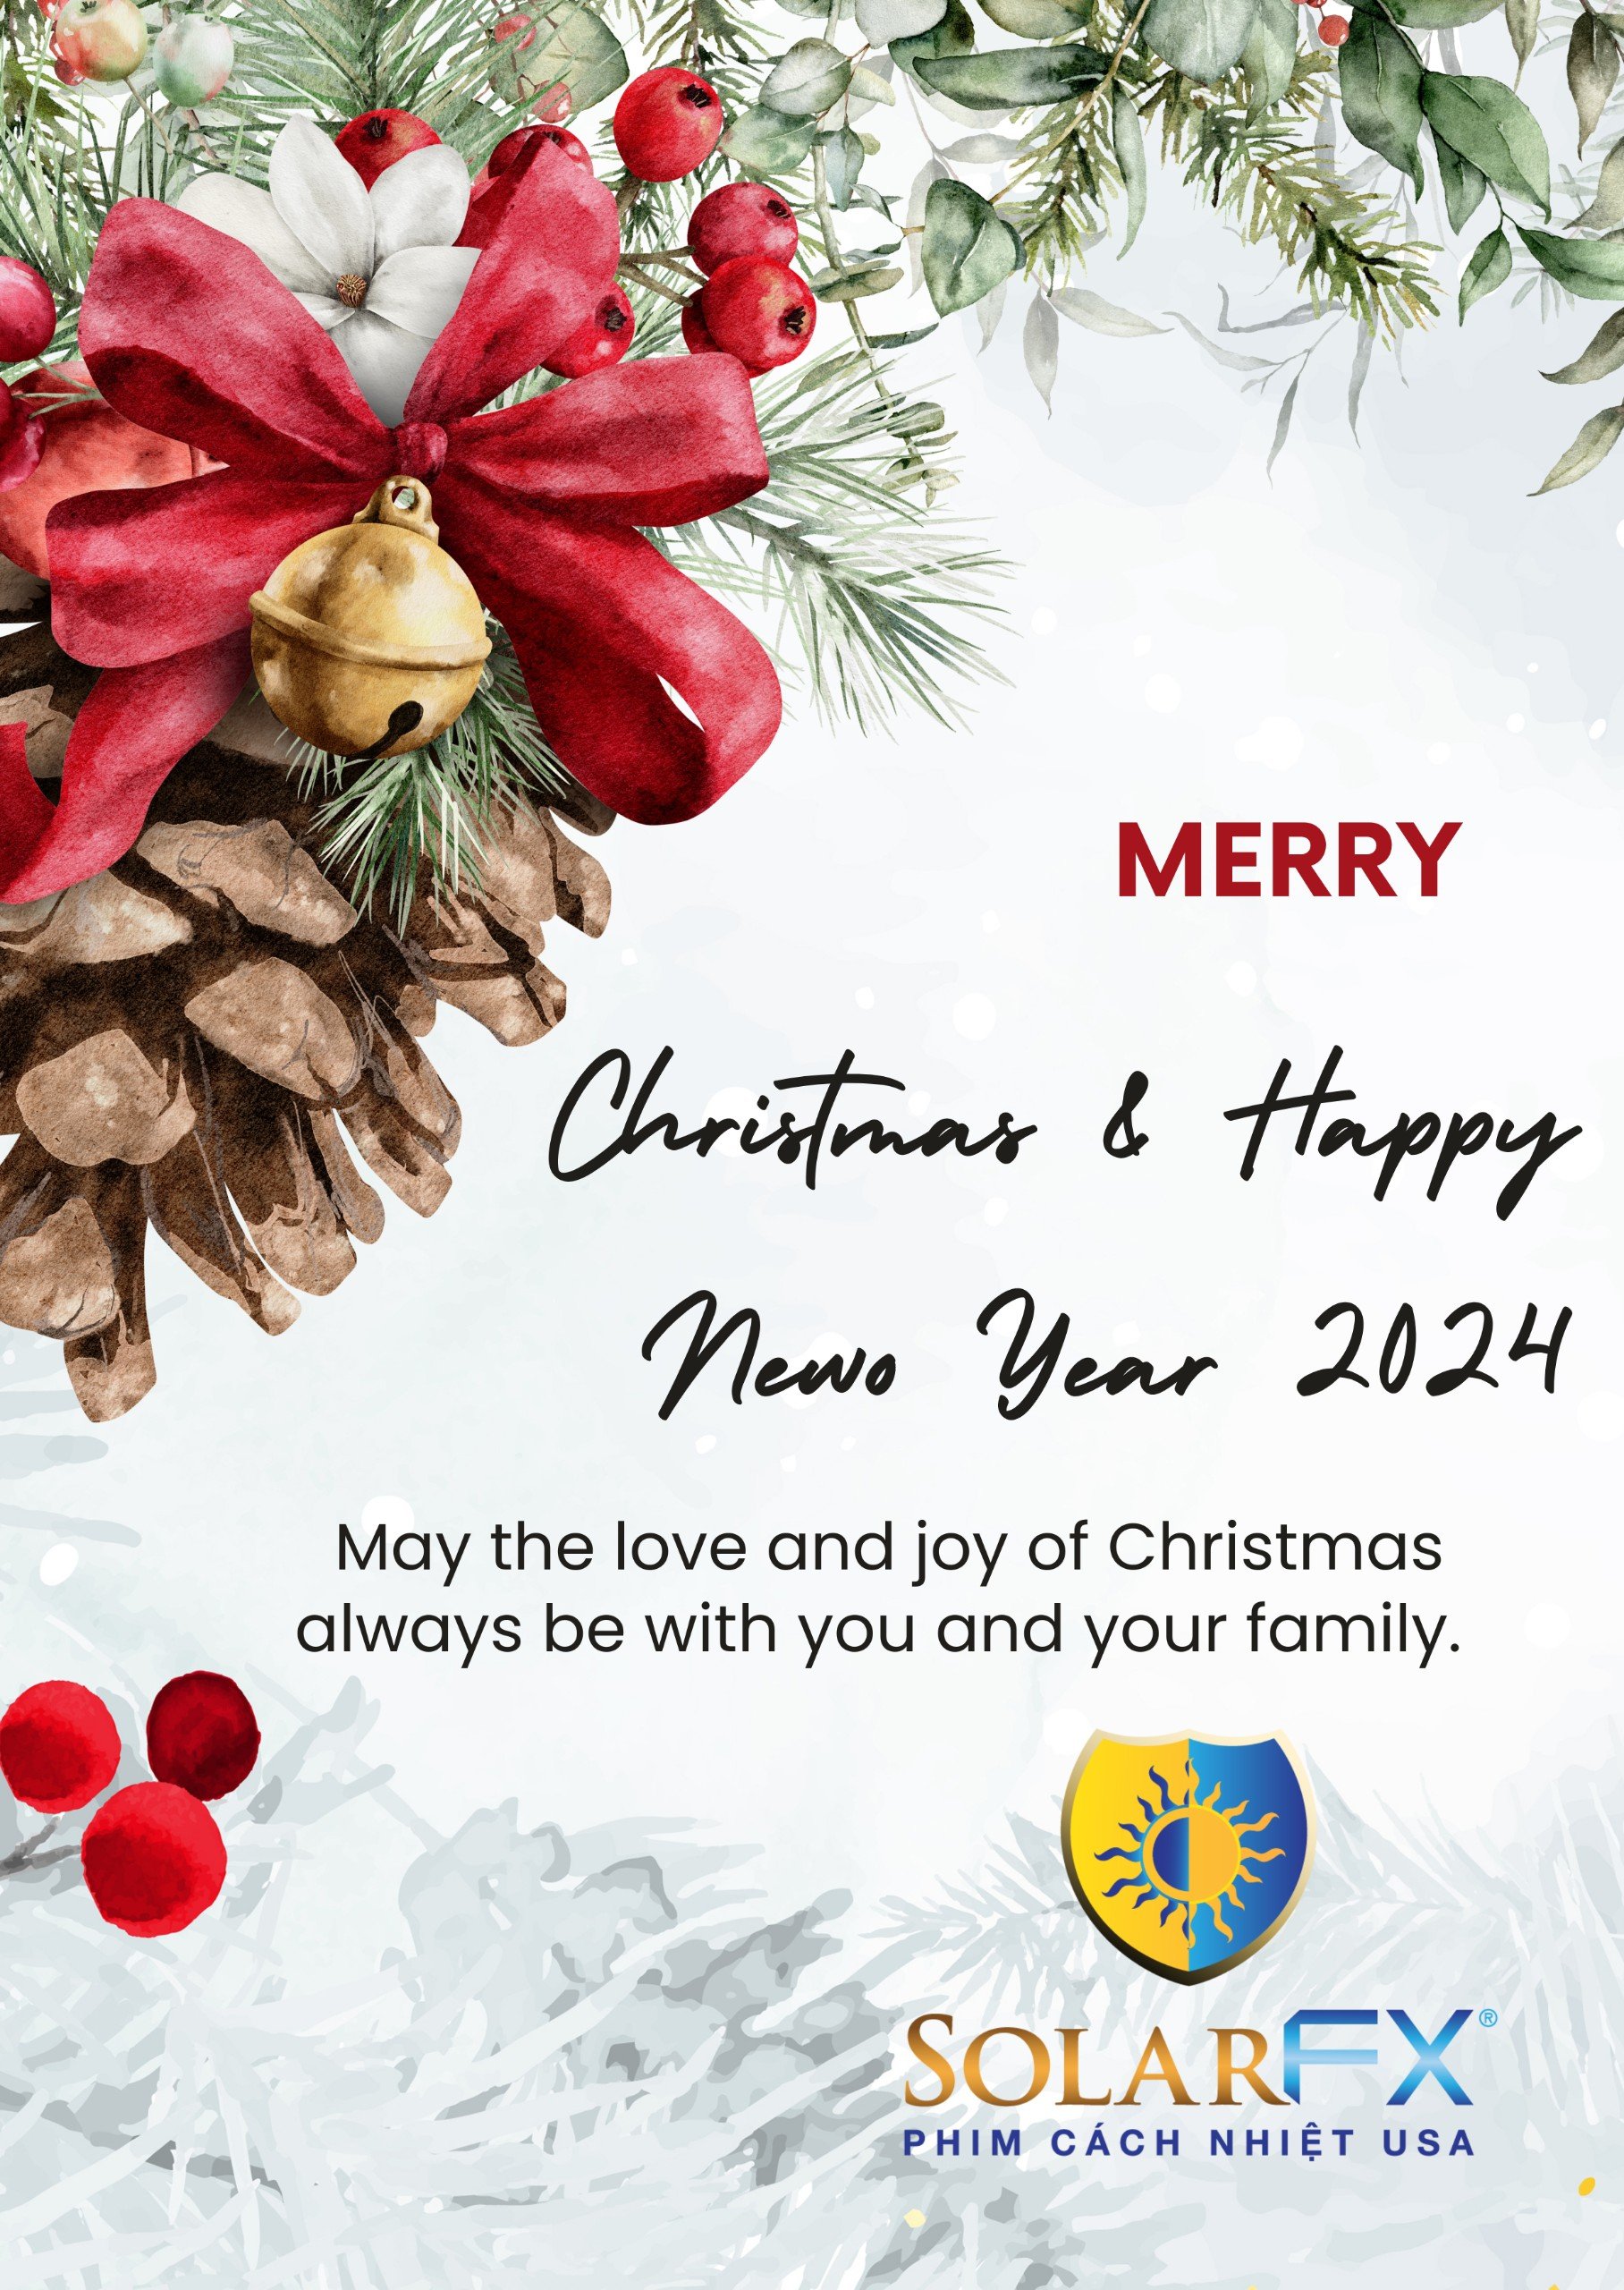 MERRY CHRISTMAS AND HAPPY NEW YEAR 2024 !